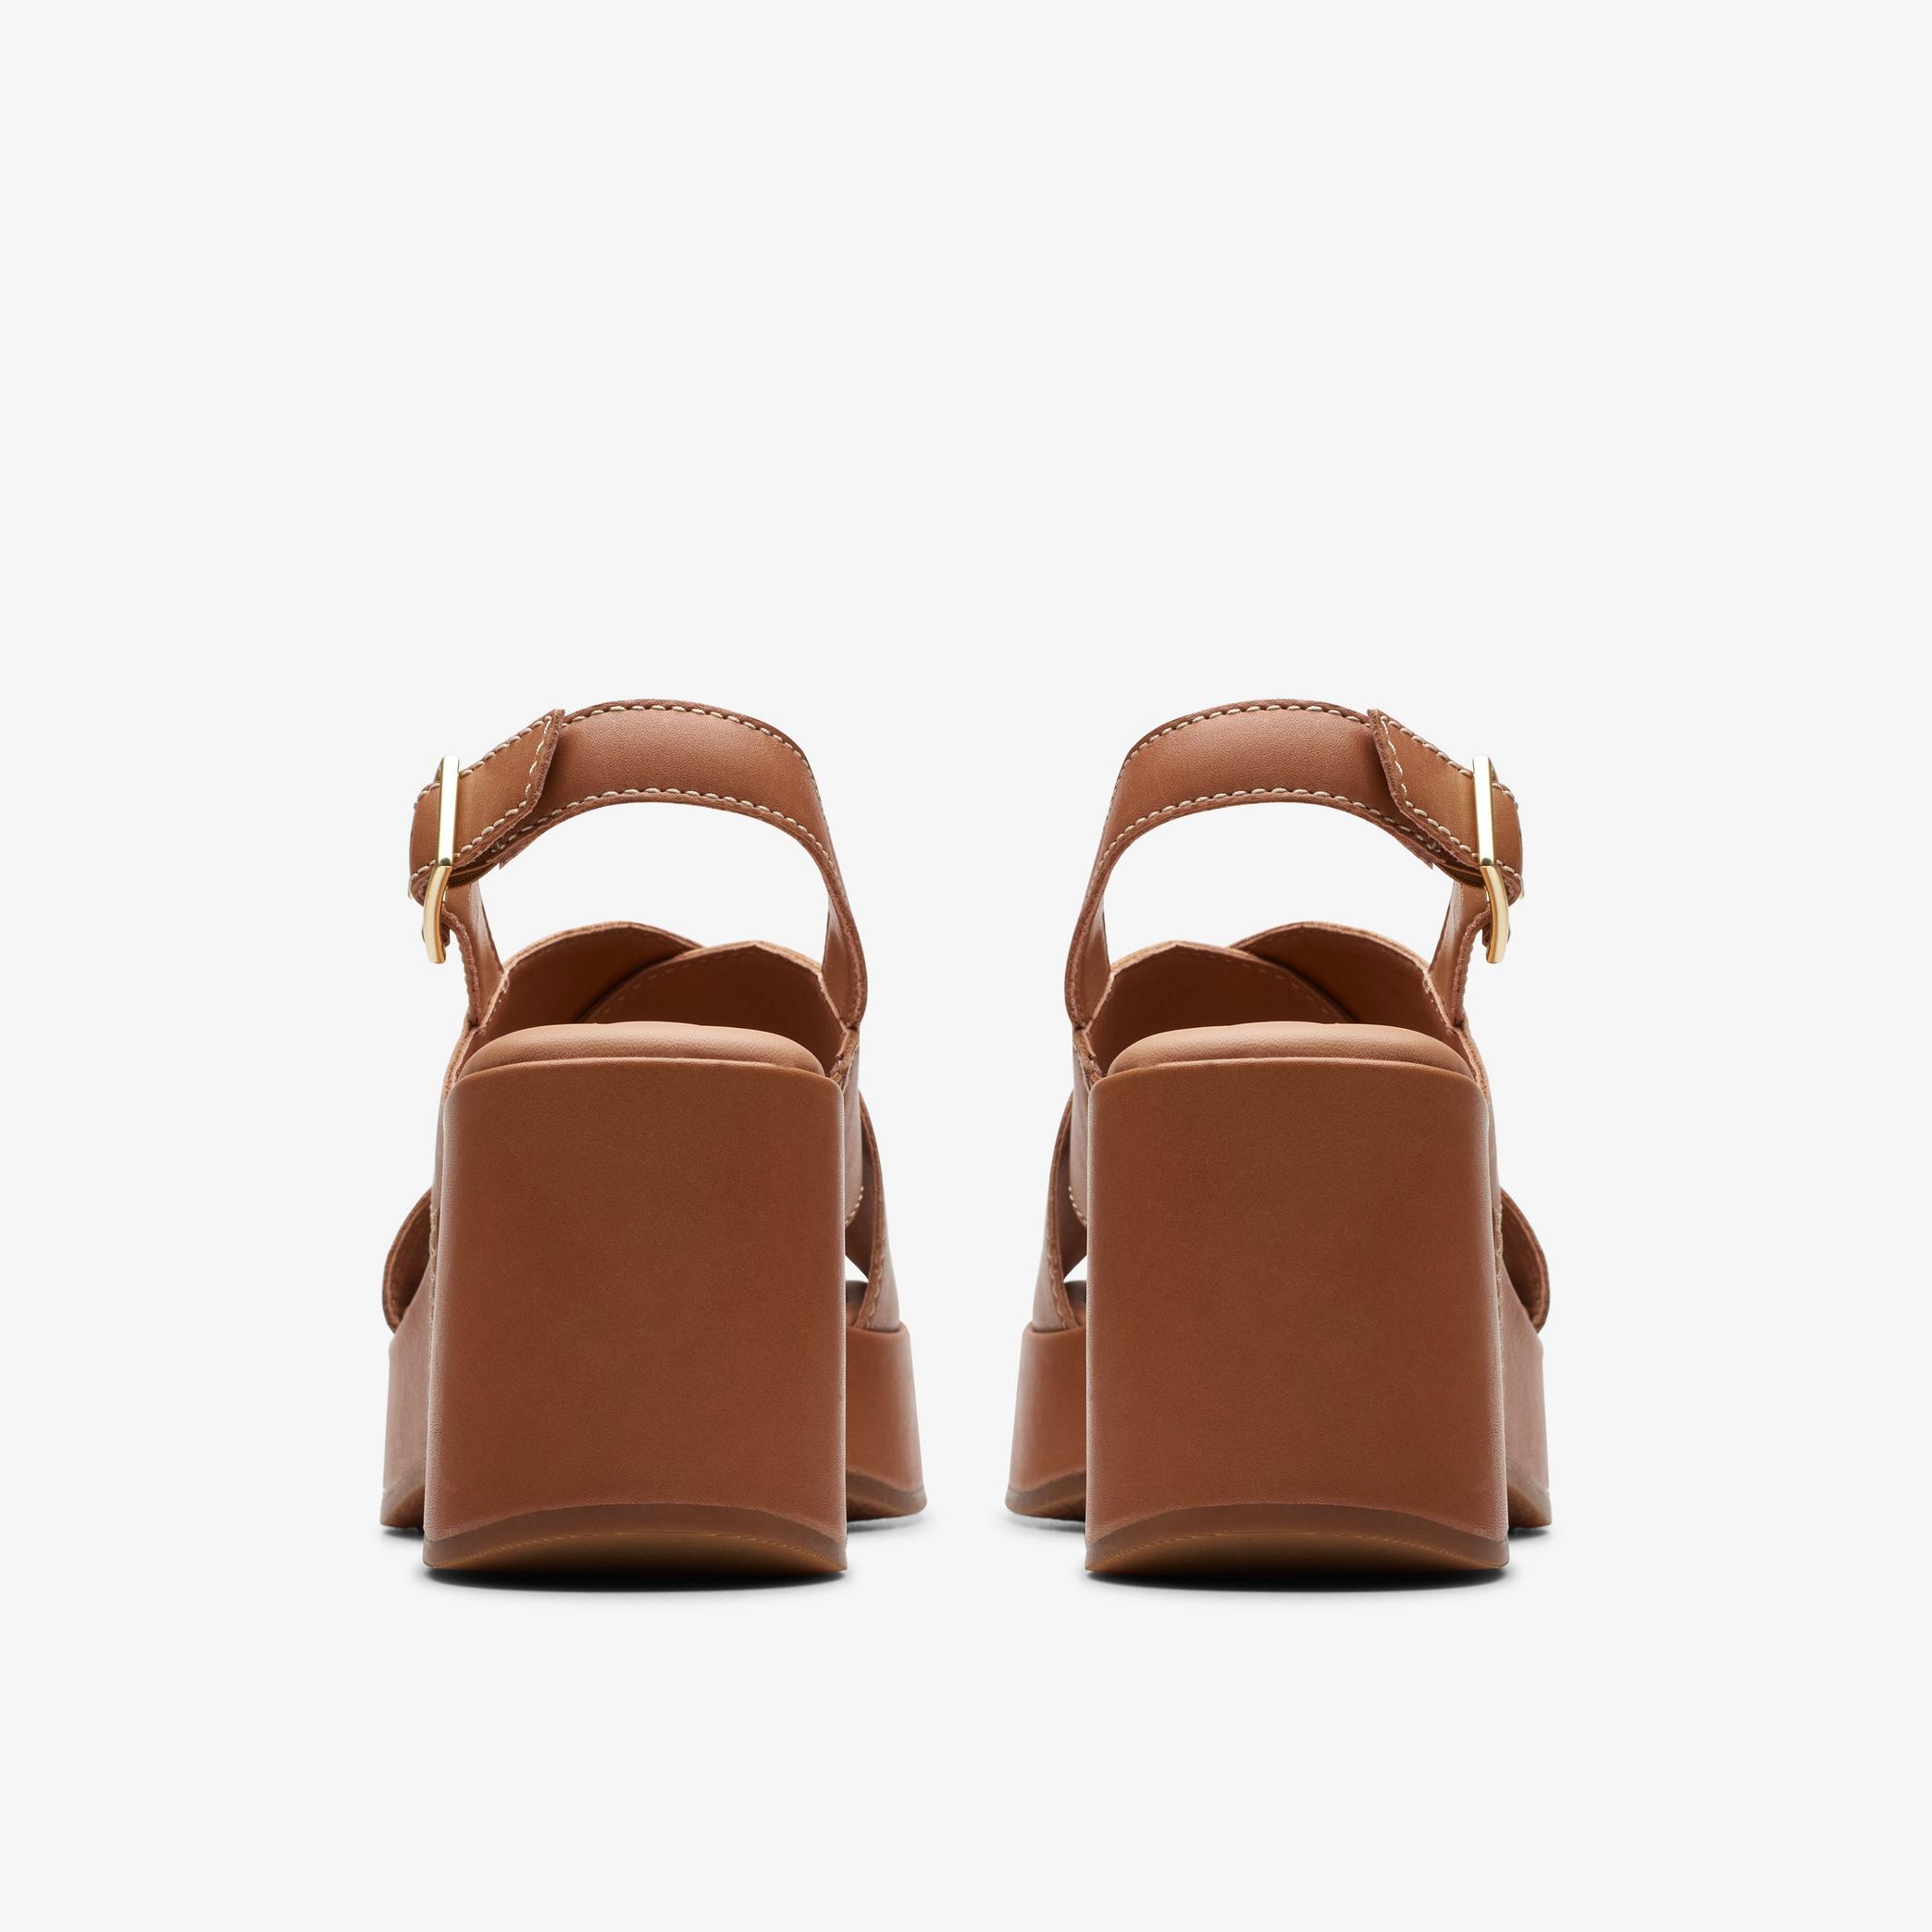 Manon Wish Tan Leather Heeled Sandals, view 5 of 6